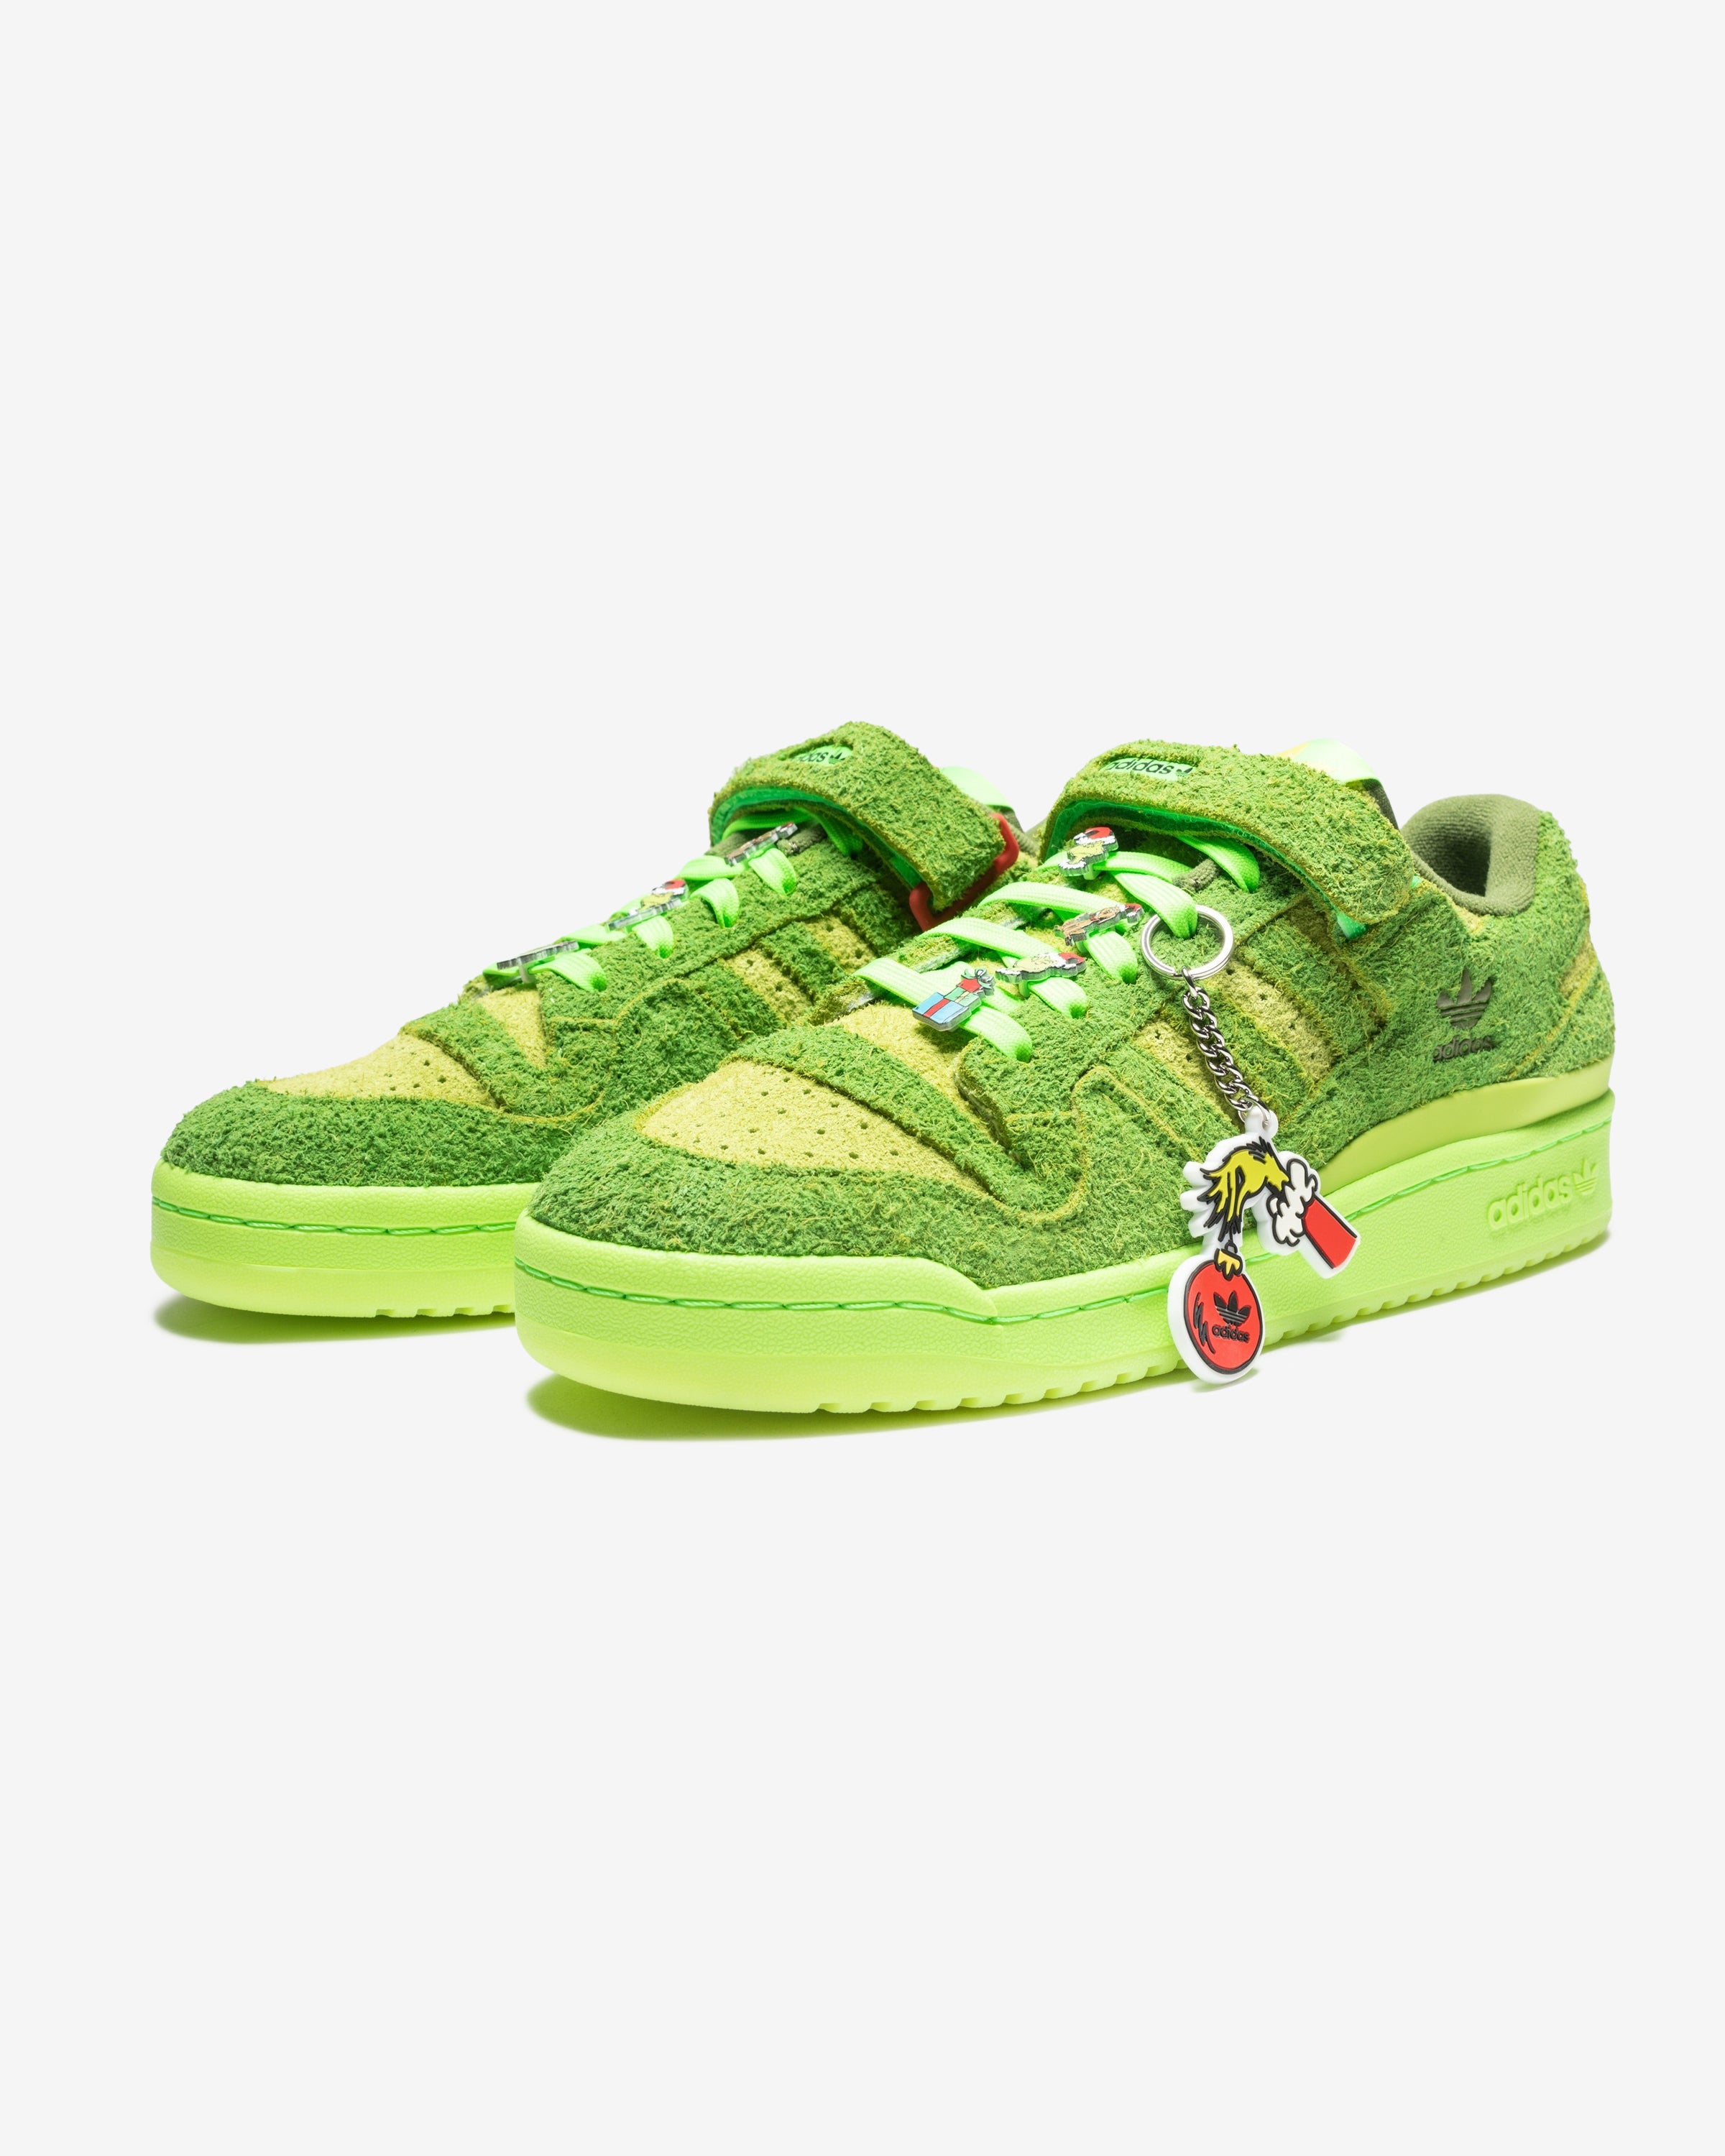 ADIDAS FORUM LOW - SUPCOL/ SGREEN/ RED